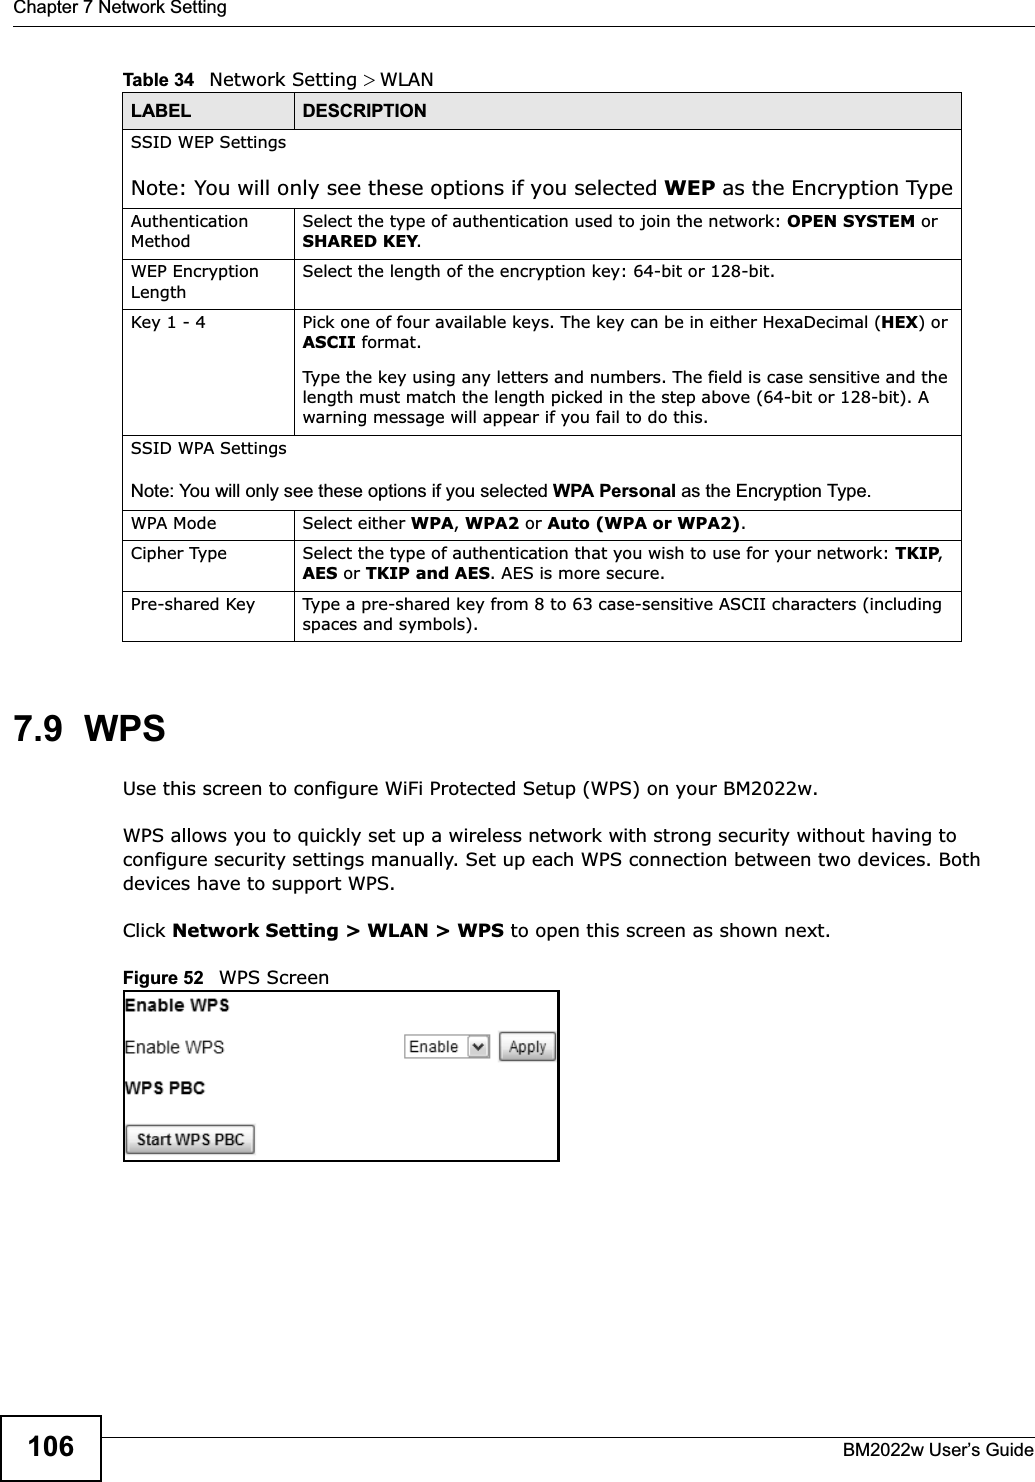 Chapter 7 Network SettingBM2022w User’s Guide1067.9  WPSUse this screen to configure WiFi Protected Setup (WPS) on your BM2022w.WPS allows you to quickly set up a wireless network with strong security without having to configure security settings manually. Set up each WPS connection between two devices. Both devices have to support WPS.Click Network Setting &gt; WLAN &gt; WPS to open this screen as shown next.Figure 52   WPS ScreenSSID WEP SettingsNote: You will only see these options if you selected WEP as the Encryption TypeAuthentication MethodSelect the type of authentication used to join the network: OPEN SYSTEM or SHARED KEY.WEP Encryption LengthSelect the length of the encryption key: 64-bit or 128-bit.Key 1 - 4 Pick one of four available keys. The key can be in either HexaDecimal (HEX) or ASCII format.Type the key using any letters and numbers. The field is case sensitive and the length must match the length picked in the step above (64-bit or 128-bit). A warning message will appear if you fail to do this.SSID WPA SettingsNote: You will only see these options if you selected WPA Personal as the Encryption Type.WPA Mode Select either WPA,WPA2 or Auto (WPA or WPA2).Cipher Type Select the type of authentication that you wish to use for your network: TKIP,AES or TKIP and AES. AES is more secure.Pre-shared Key Type a pre-shared key from 8 to 63 case-sensitive ASCII characters (including spaces and symbols).Table 34   Network Setting &gt; WLANLABEL DESCRIPTION